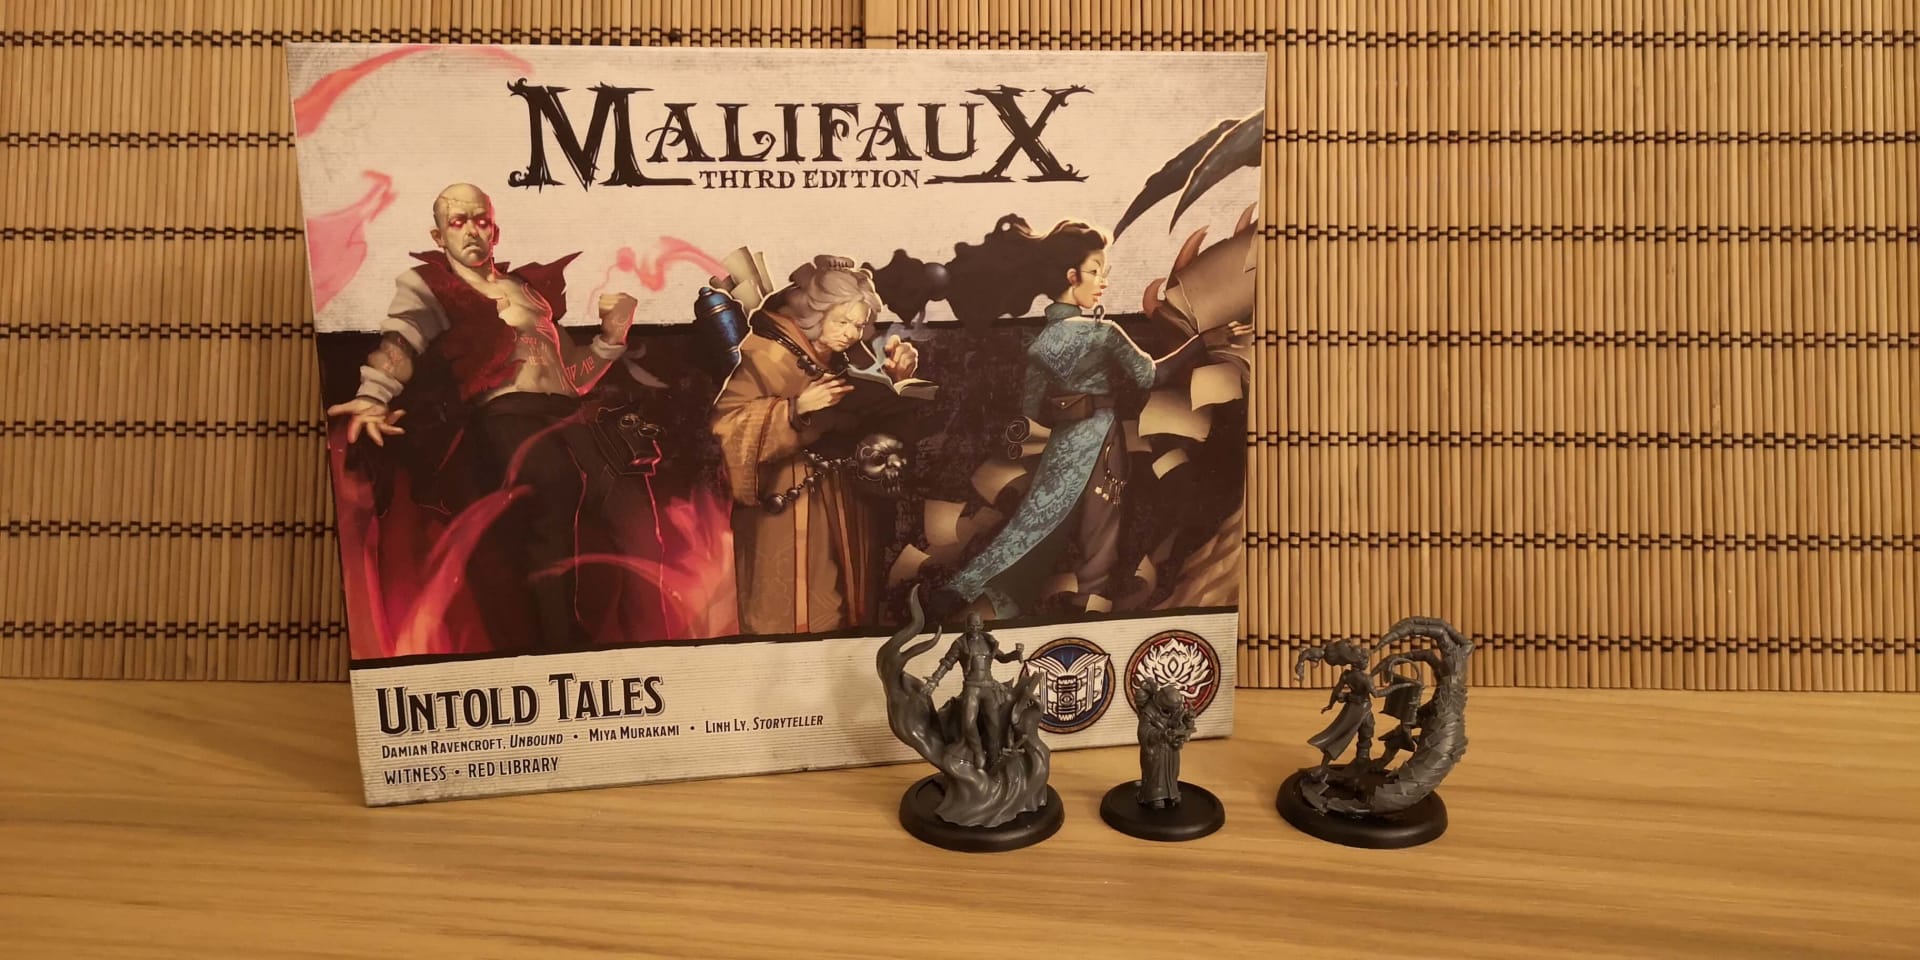 Malifaux Untold Tales box and miniatures.